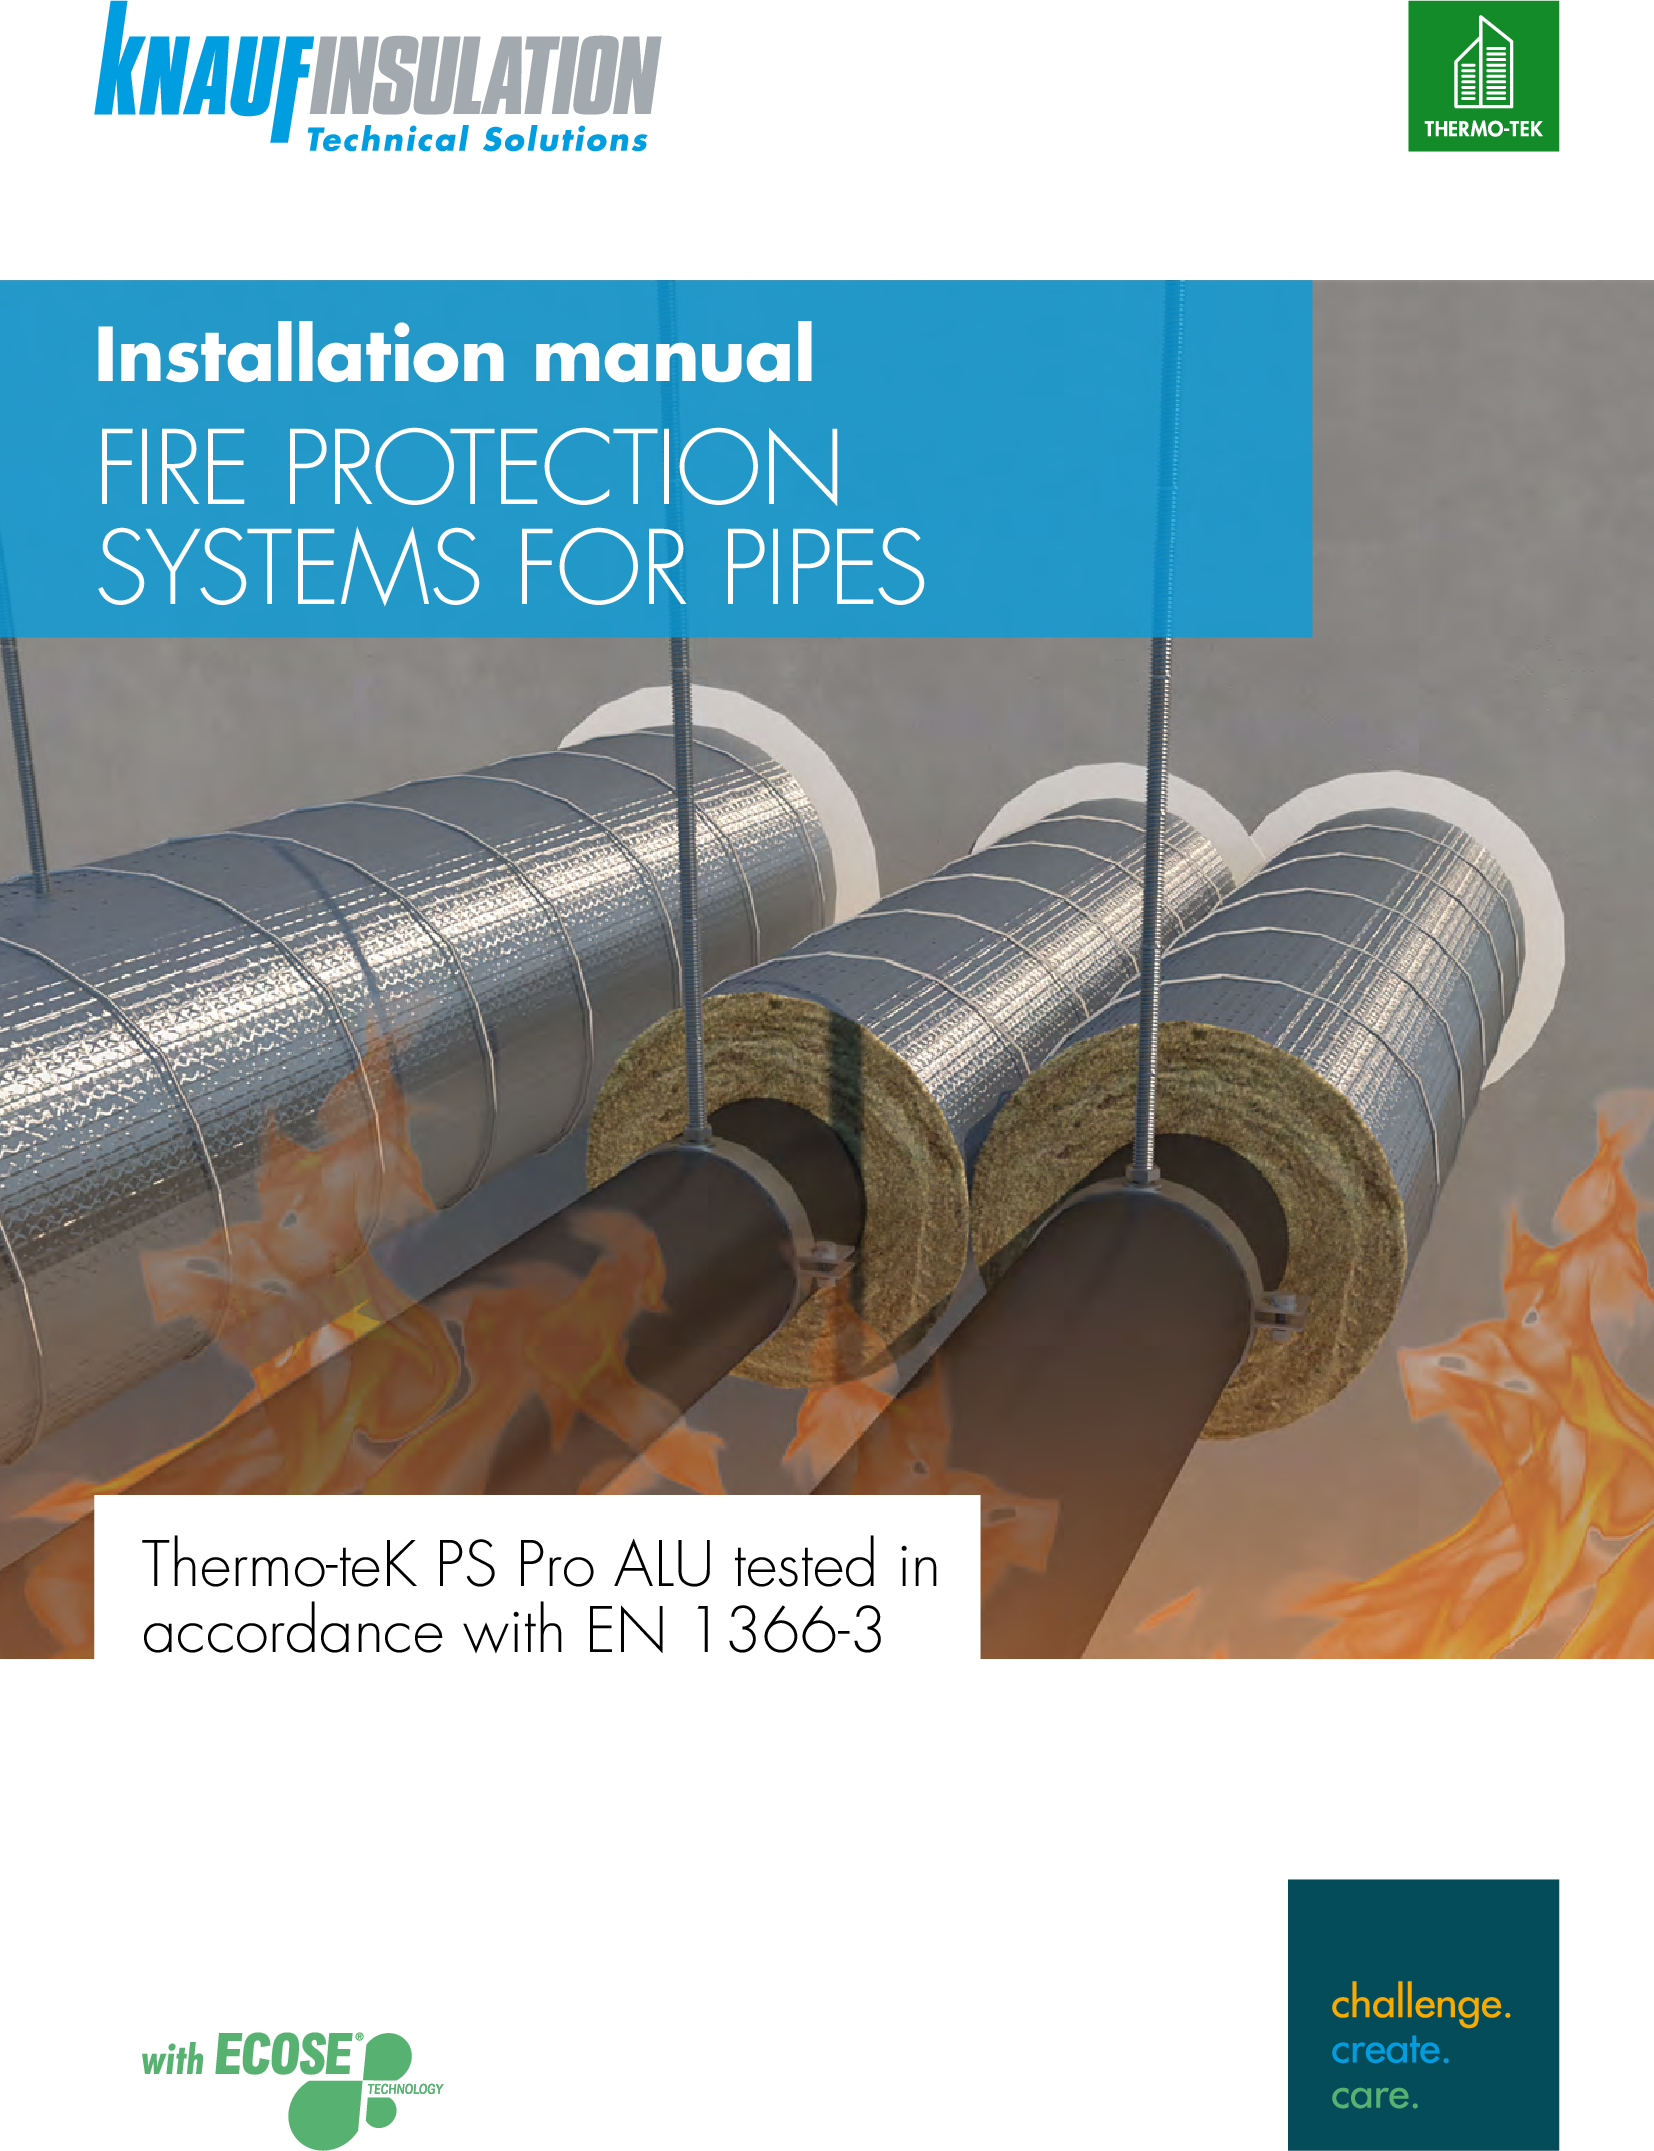 Fire systems_ Pipe insulation Thermo-teK PS Pro ALU_ notes on installations_ manual